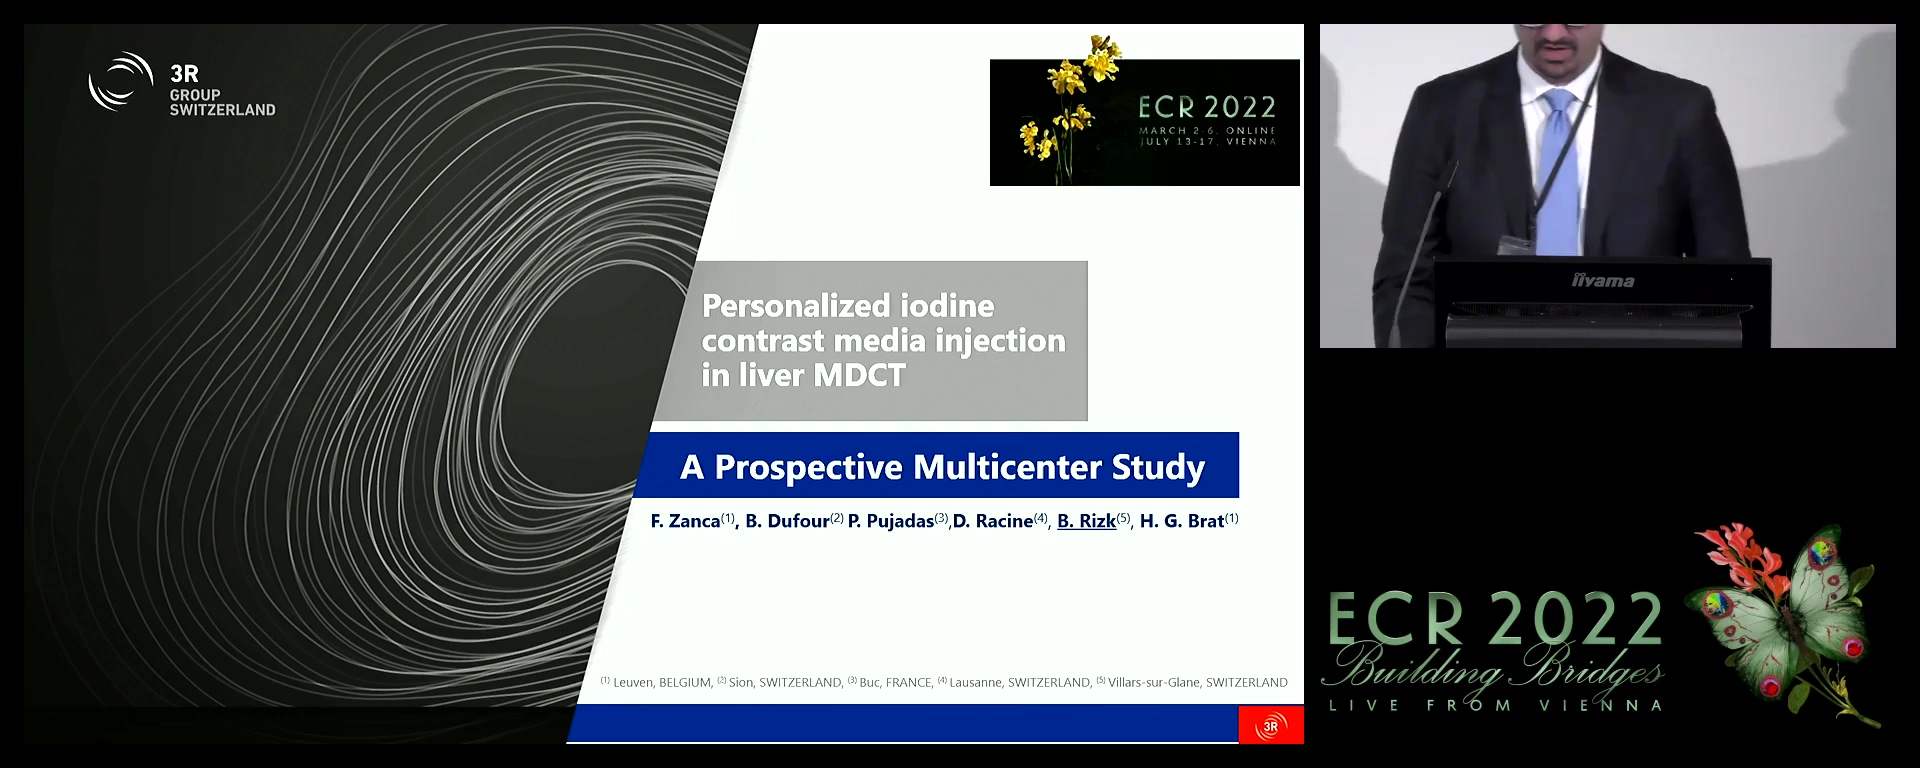 Personalised iodine contrast media injection in liver MDCT - Federica Zanca, Leuven / BE